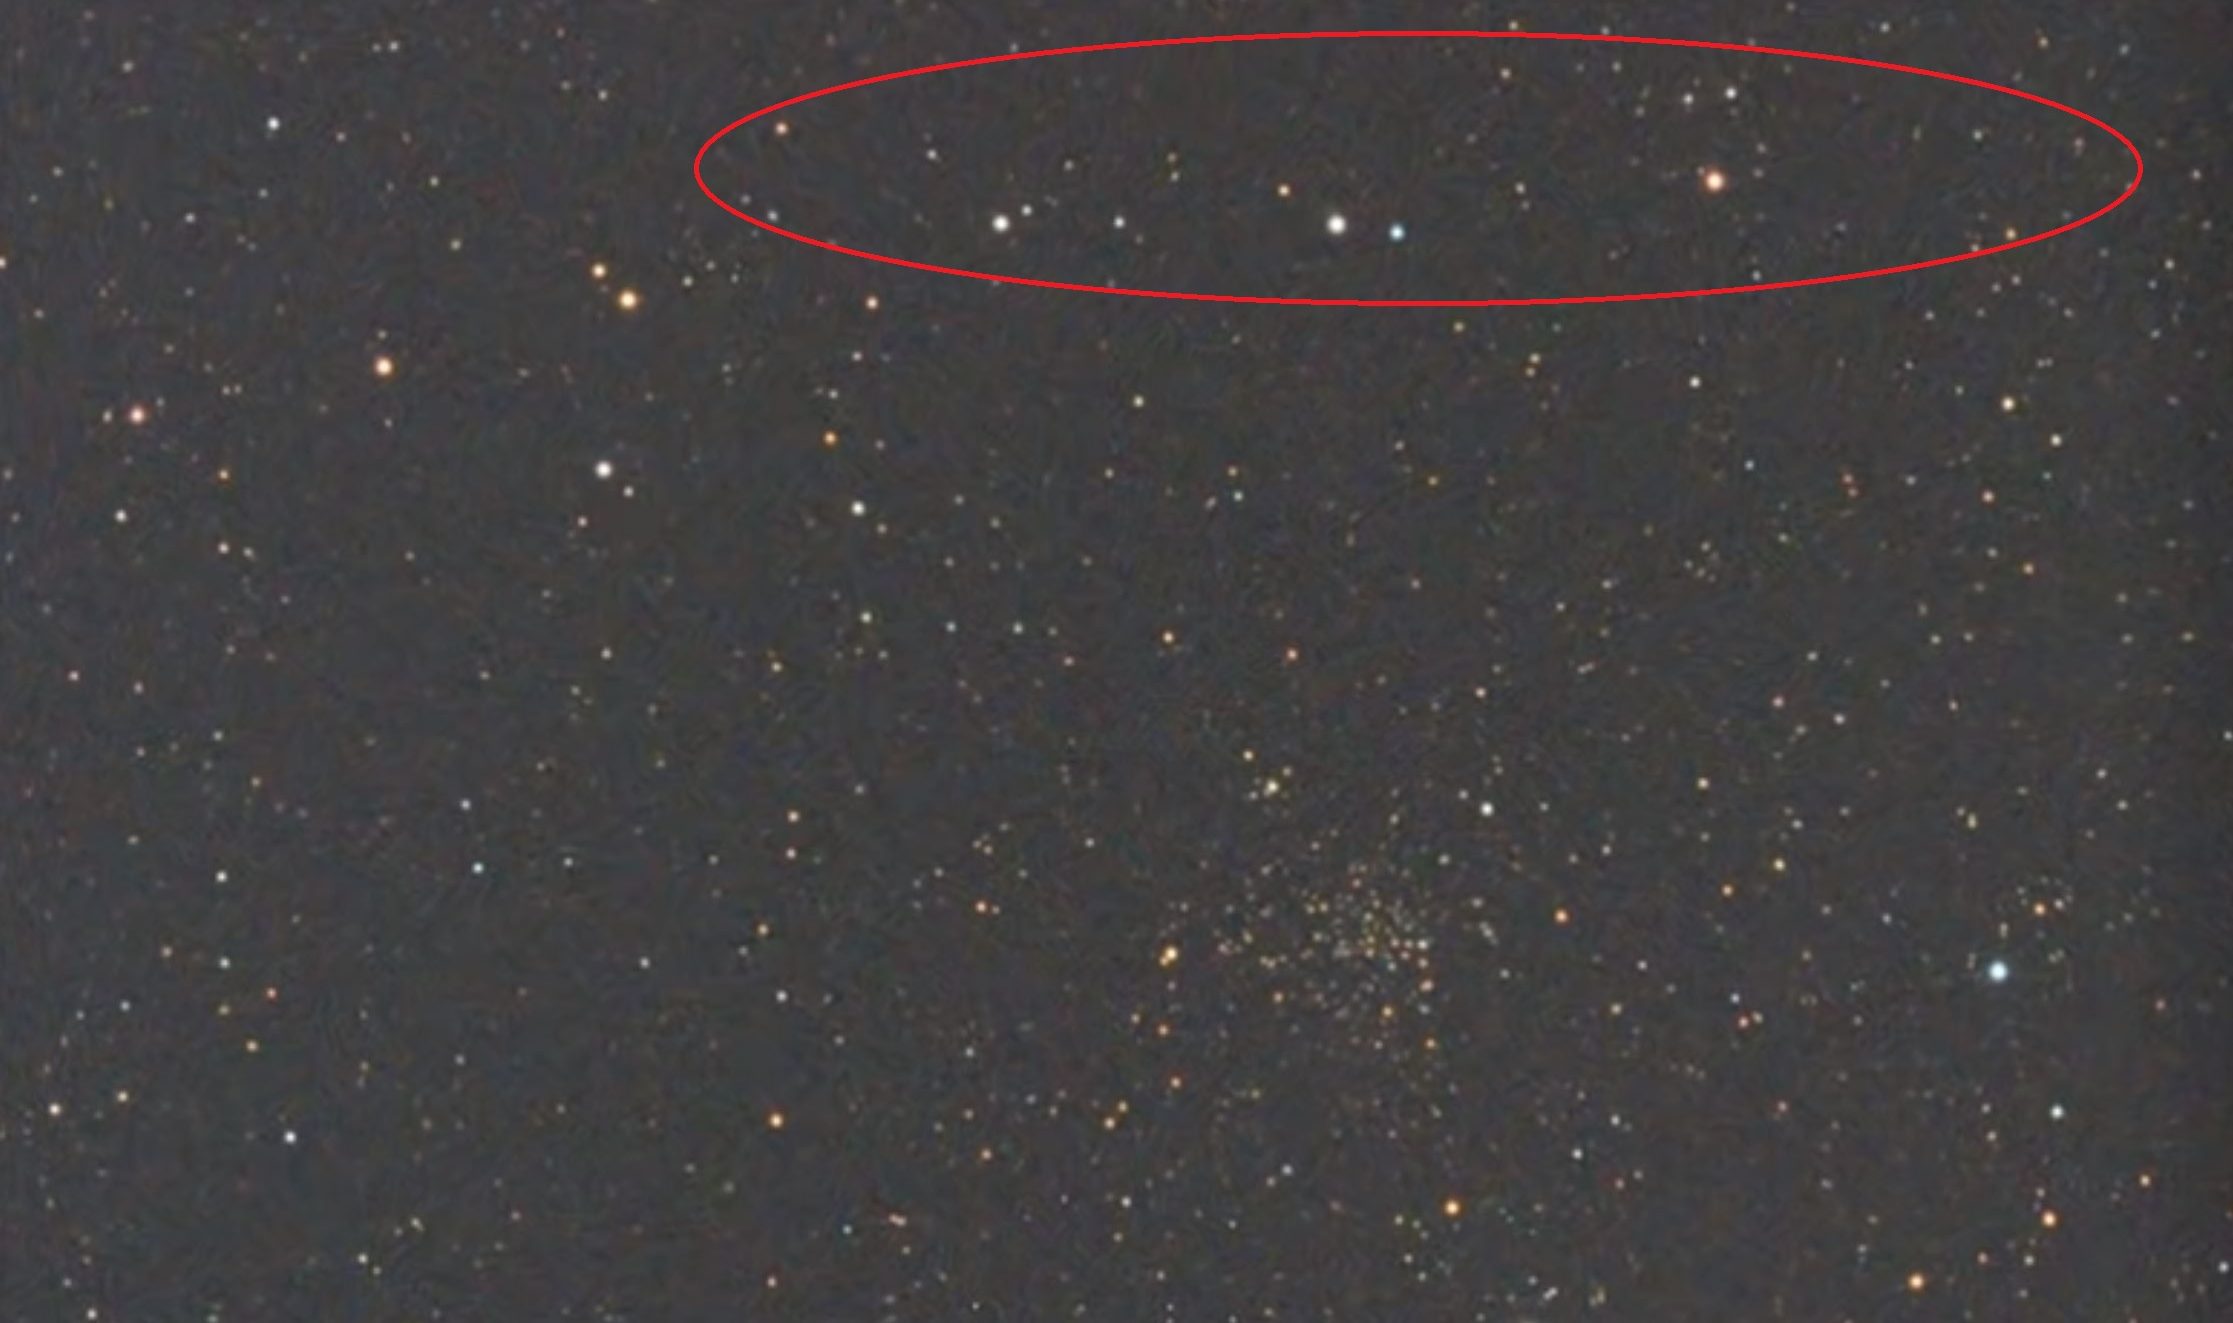 A screenshot showing the mysterious objects. Image Credit: Chuck's Astrophotography.